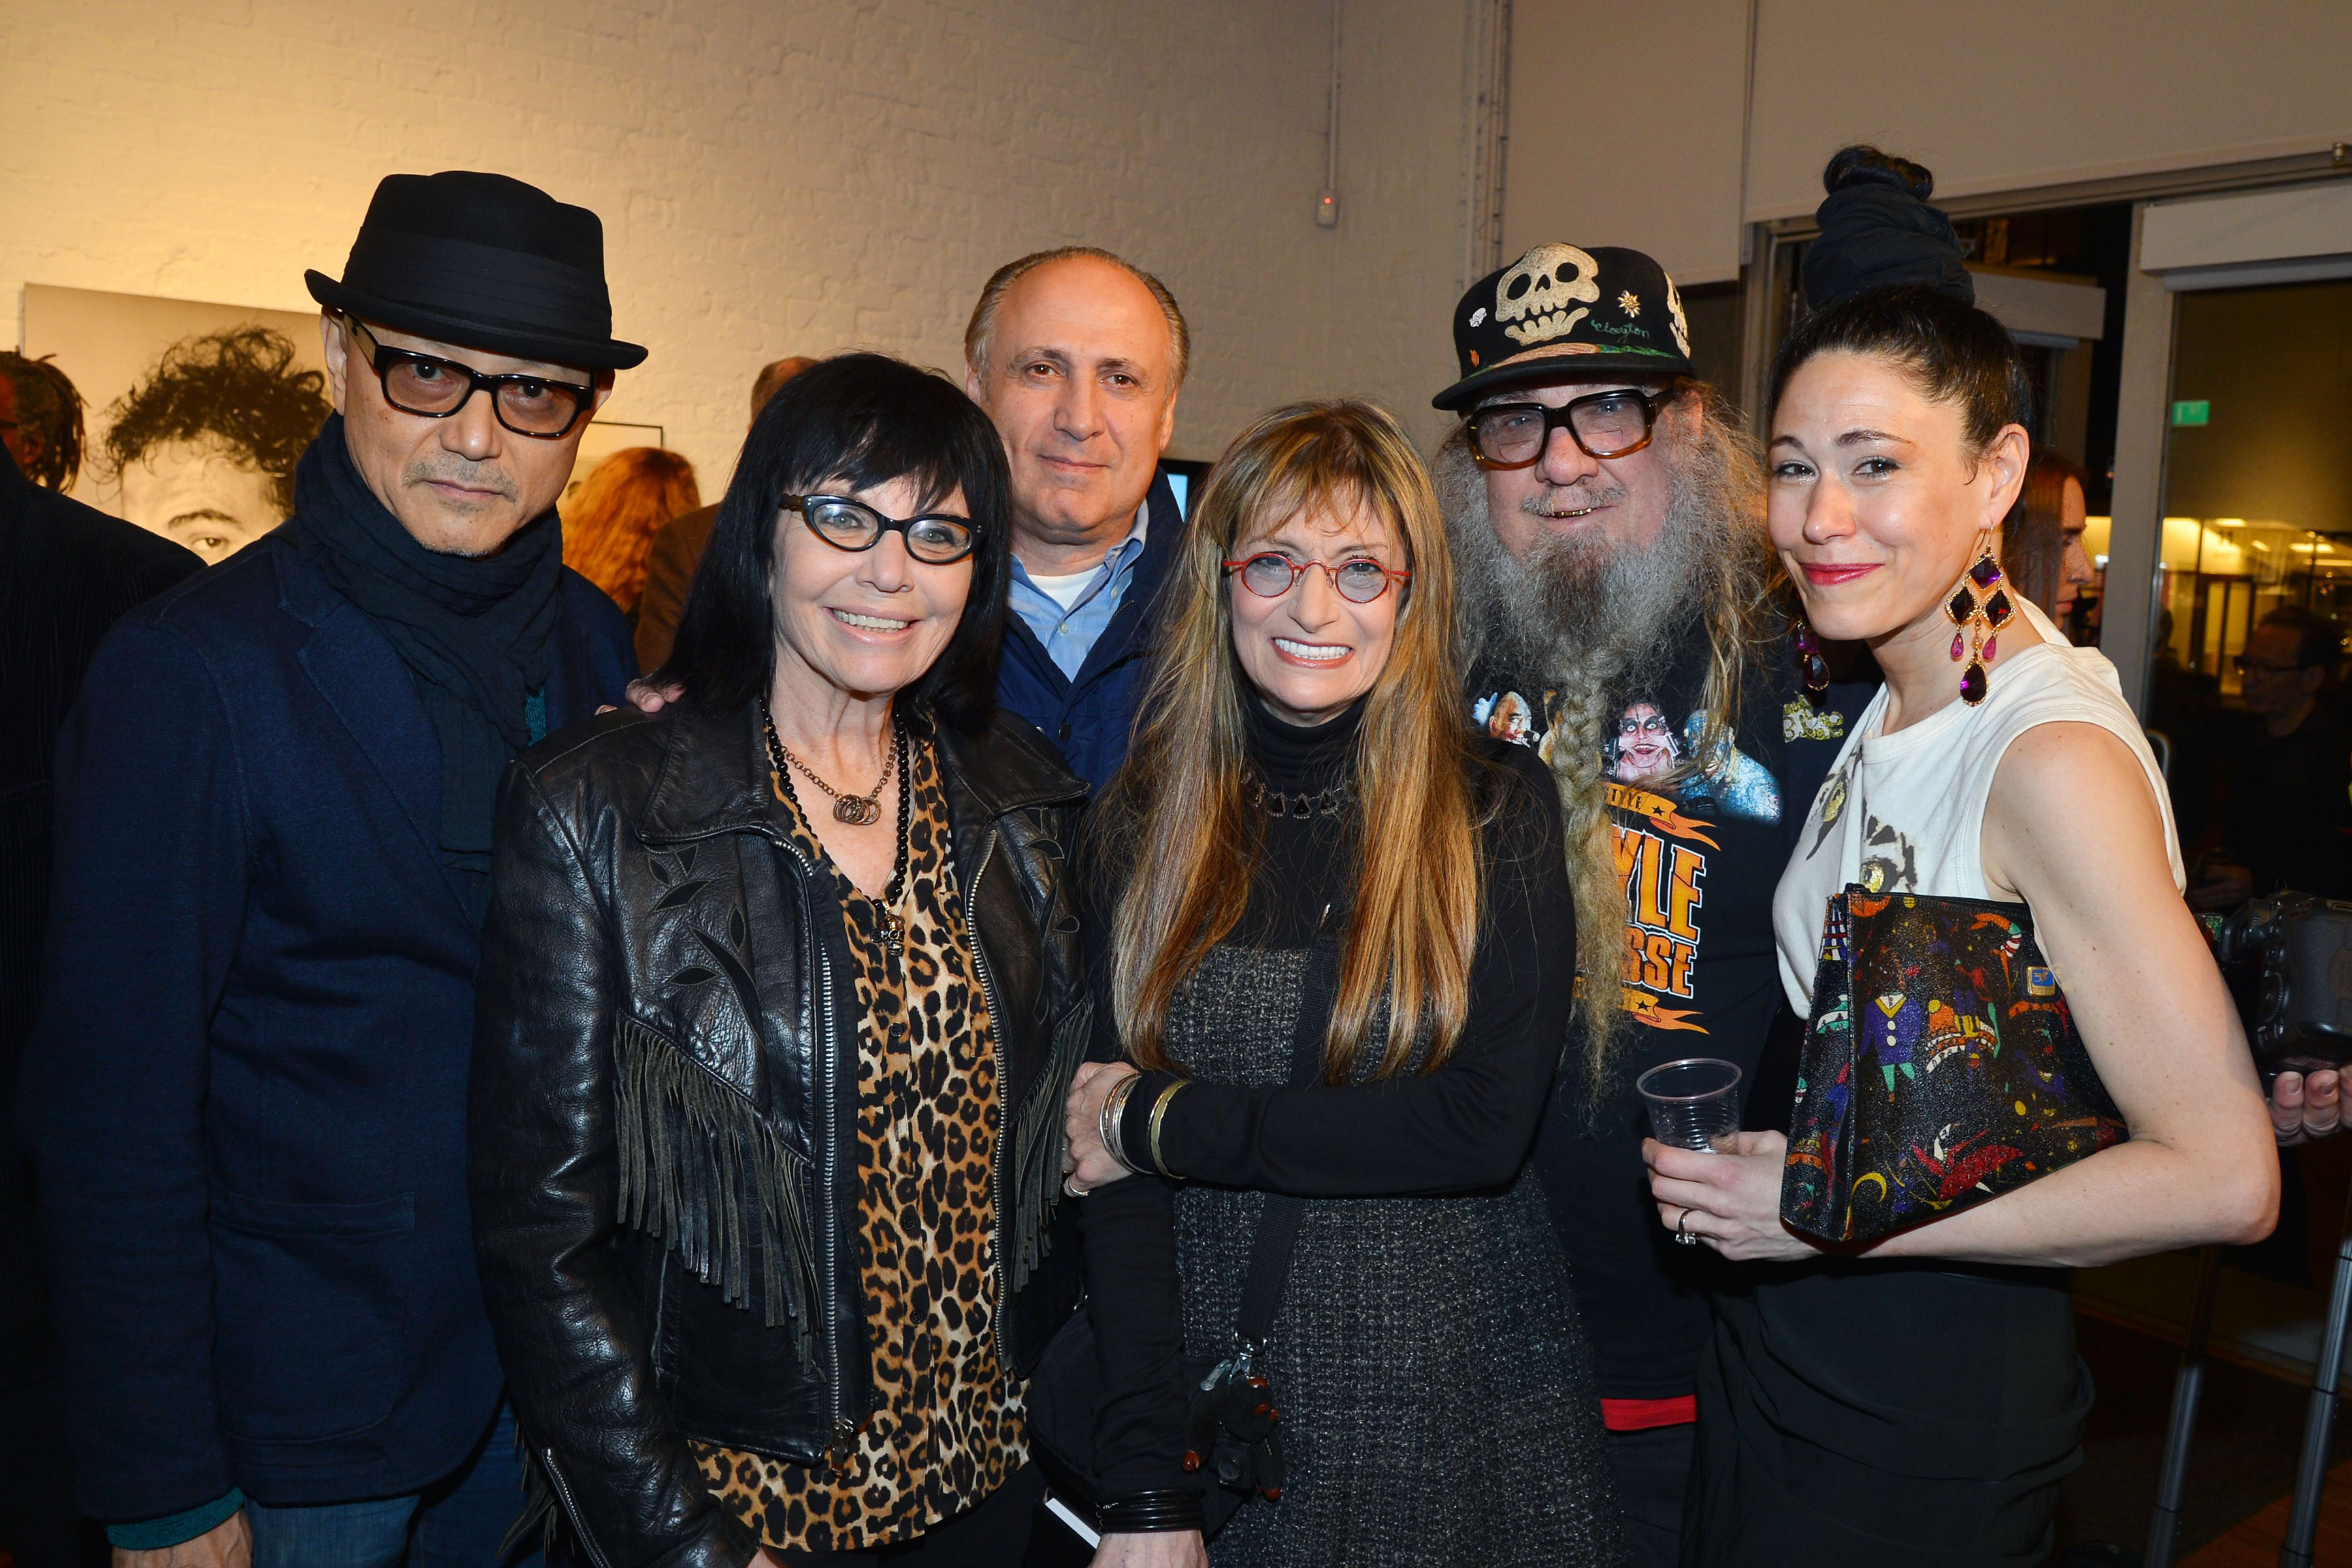 Chosei Funahara, Puma Perl, Vito Bruno, Marcia Resnick, Clayton Patterson, Elyn Kuznetova== An Exhibition of Photographs by MARCIA RESNICK From Her New Book Punks, Poets and Provocateurs:== Howl! Happening: An Arturo Vega Project6 East 1st Street, NYC== February 04, 2016== ©Patrick McMullan== Photo - Patrick McMullan/PMC== ==